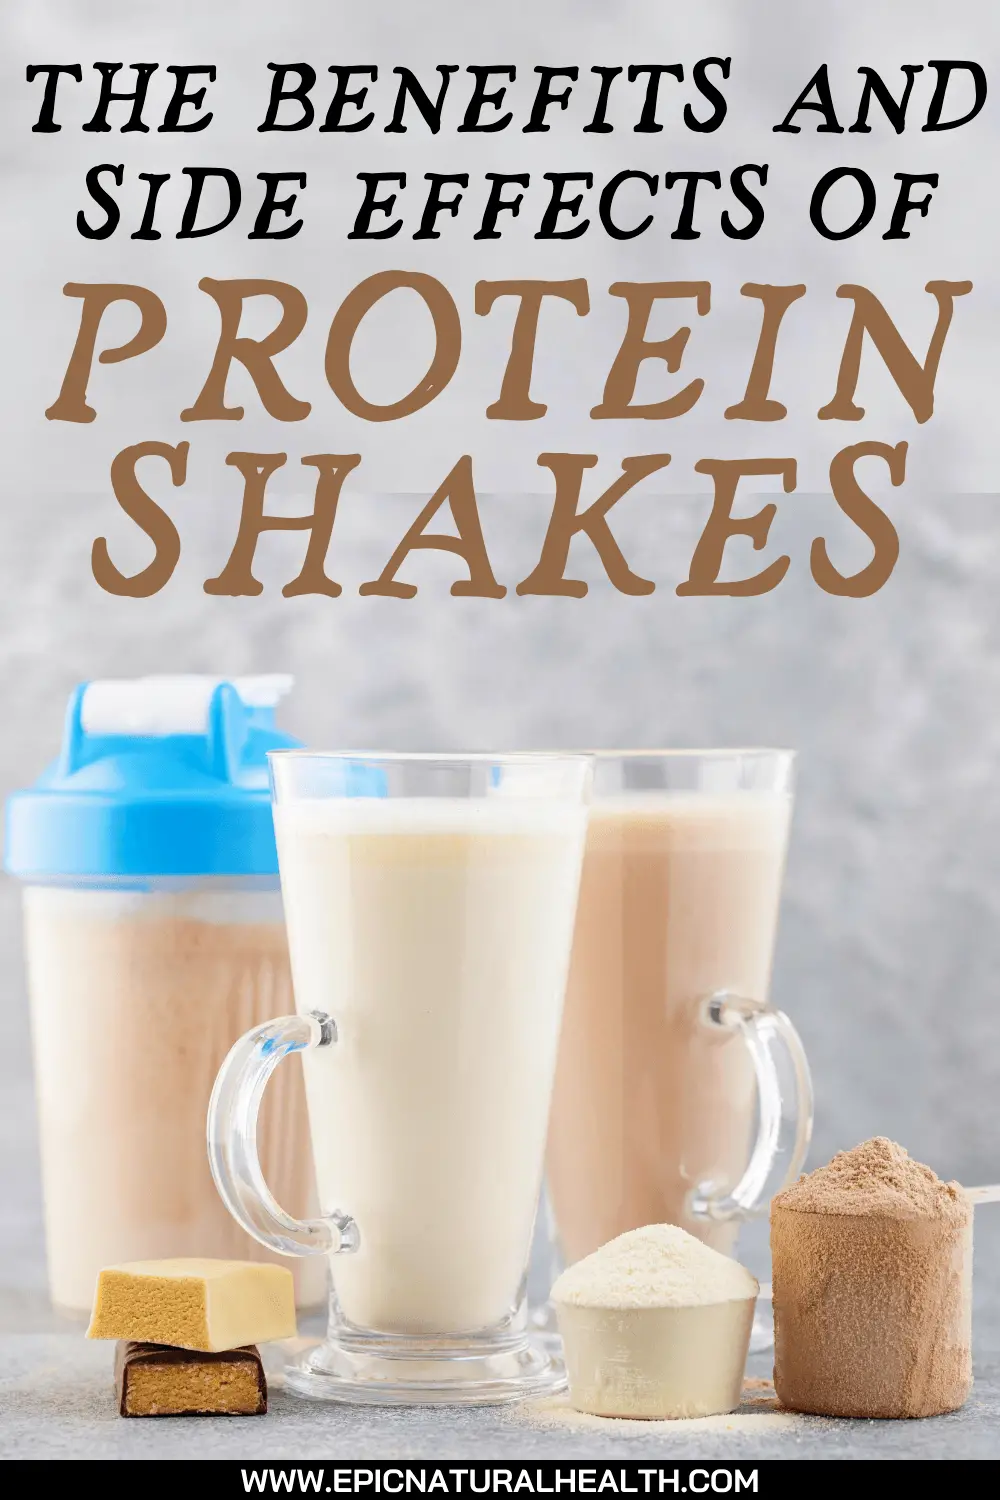 The Benefits and Side Effects of Protein Shakes